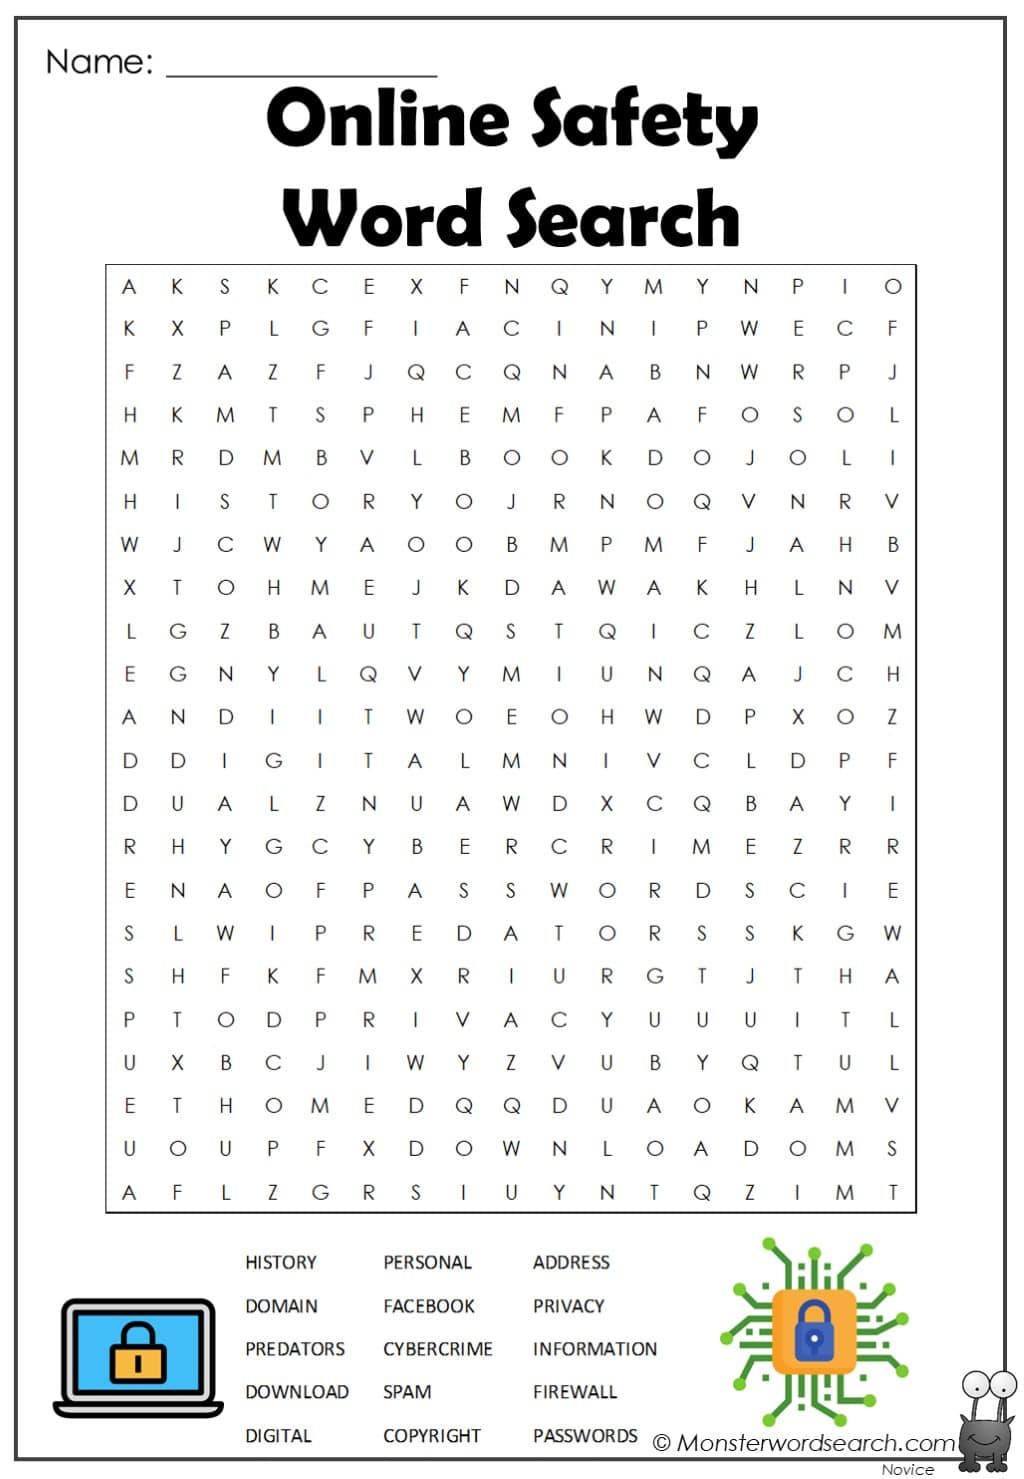 Online Safety Word Search - Monster Word Search intended for Free Online Printable Word Search